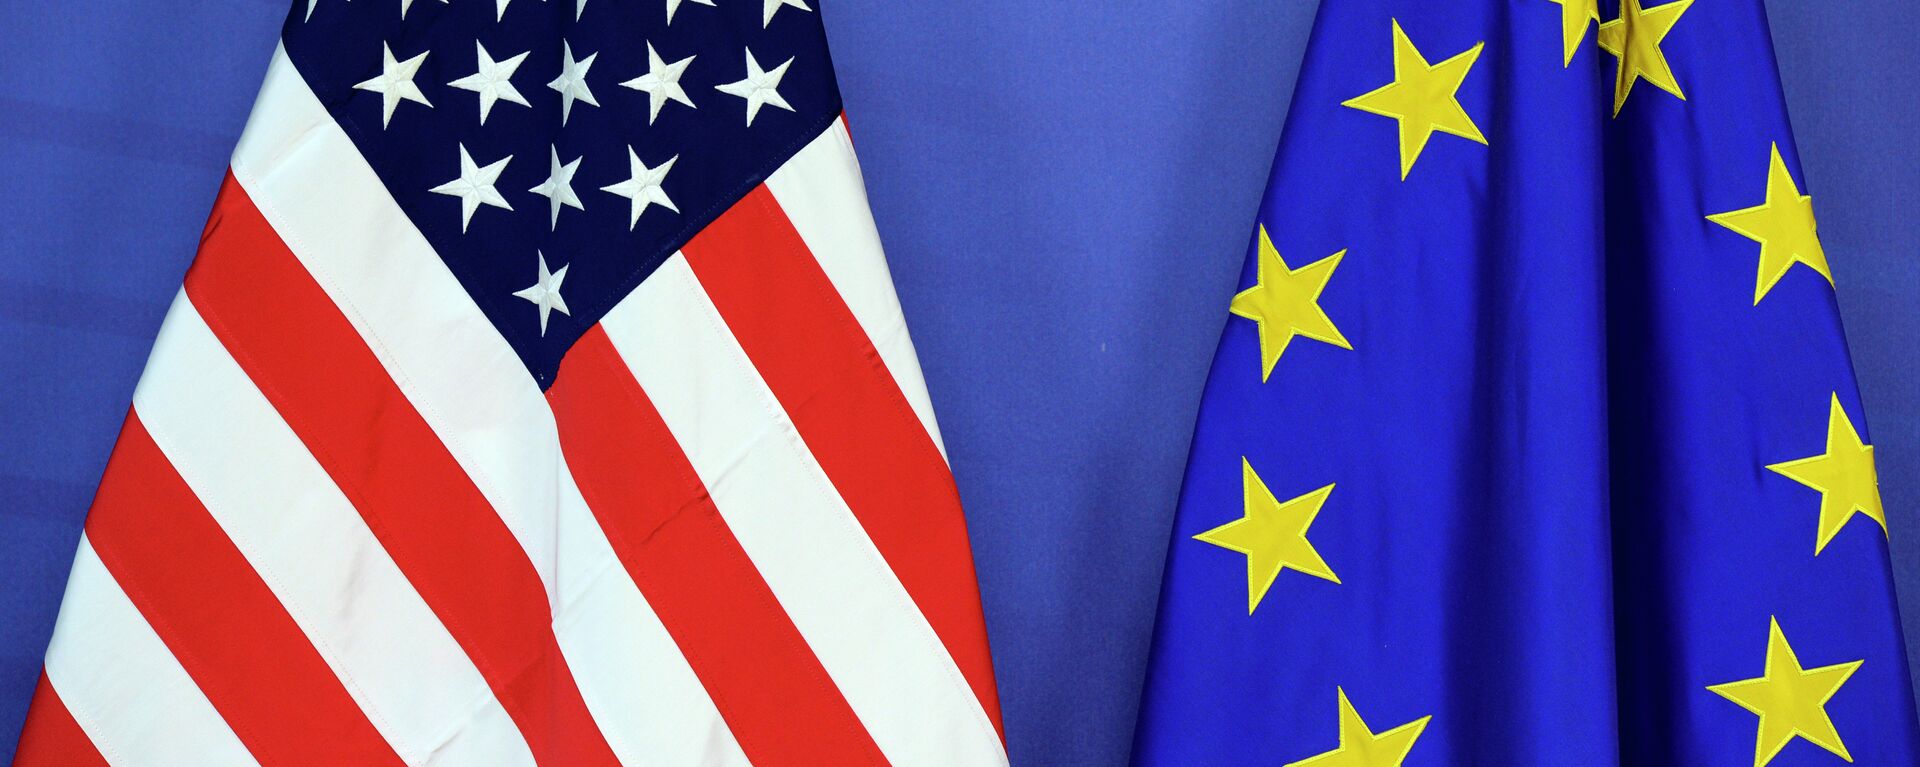 The US national flag (L) and the flag of the European Union are placed side-by-side during the Transatlantic Trade and Investment Partnership (TTIP) meeting at the European Union Commission headquarter in Brussels, on July 13, 2015 - Sputnik Mundo, 1920, 04.05.2022